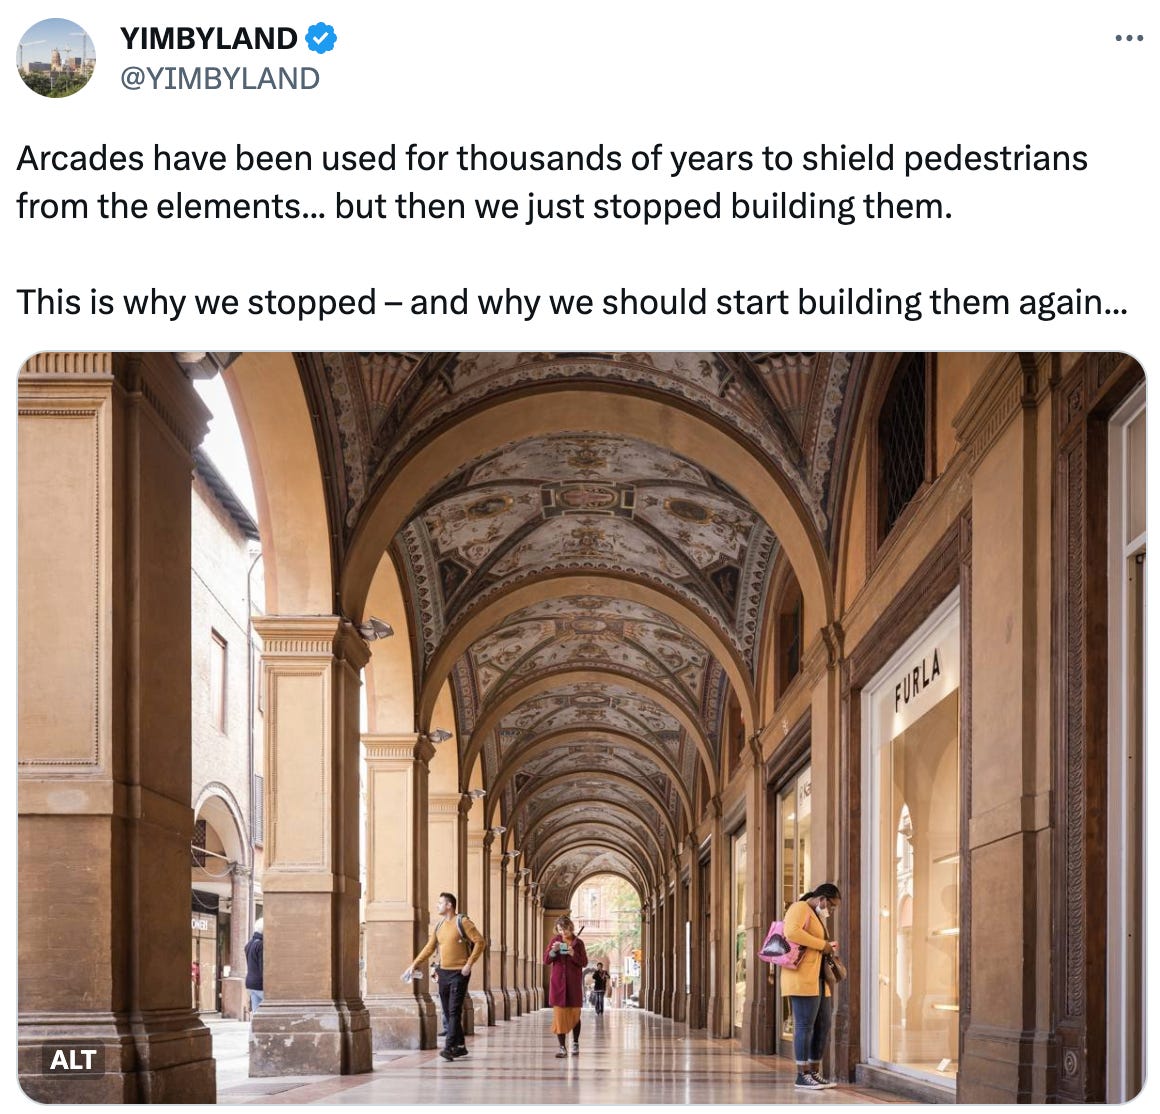  See new Tweets Conversation YIMBYLAND @YIMBYLAND Arcades have been used for thousands of years to shield pedestrians from the elements... but then we just stopped building them.  This is why we stopped – and why we should start building them again...